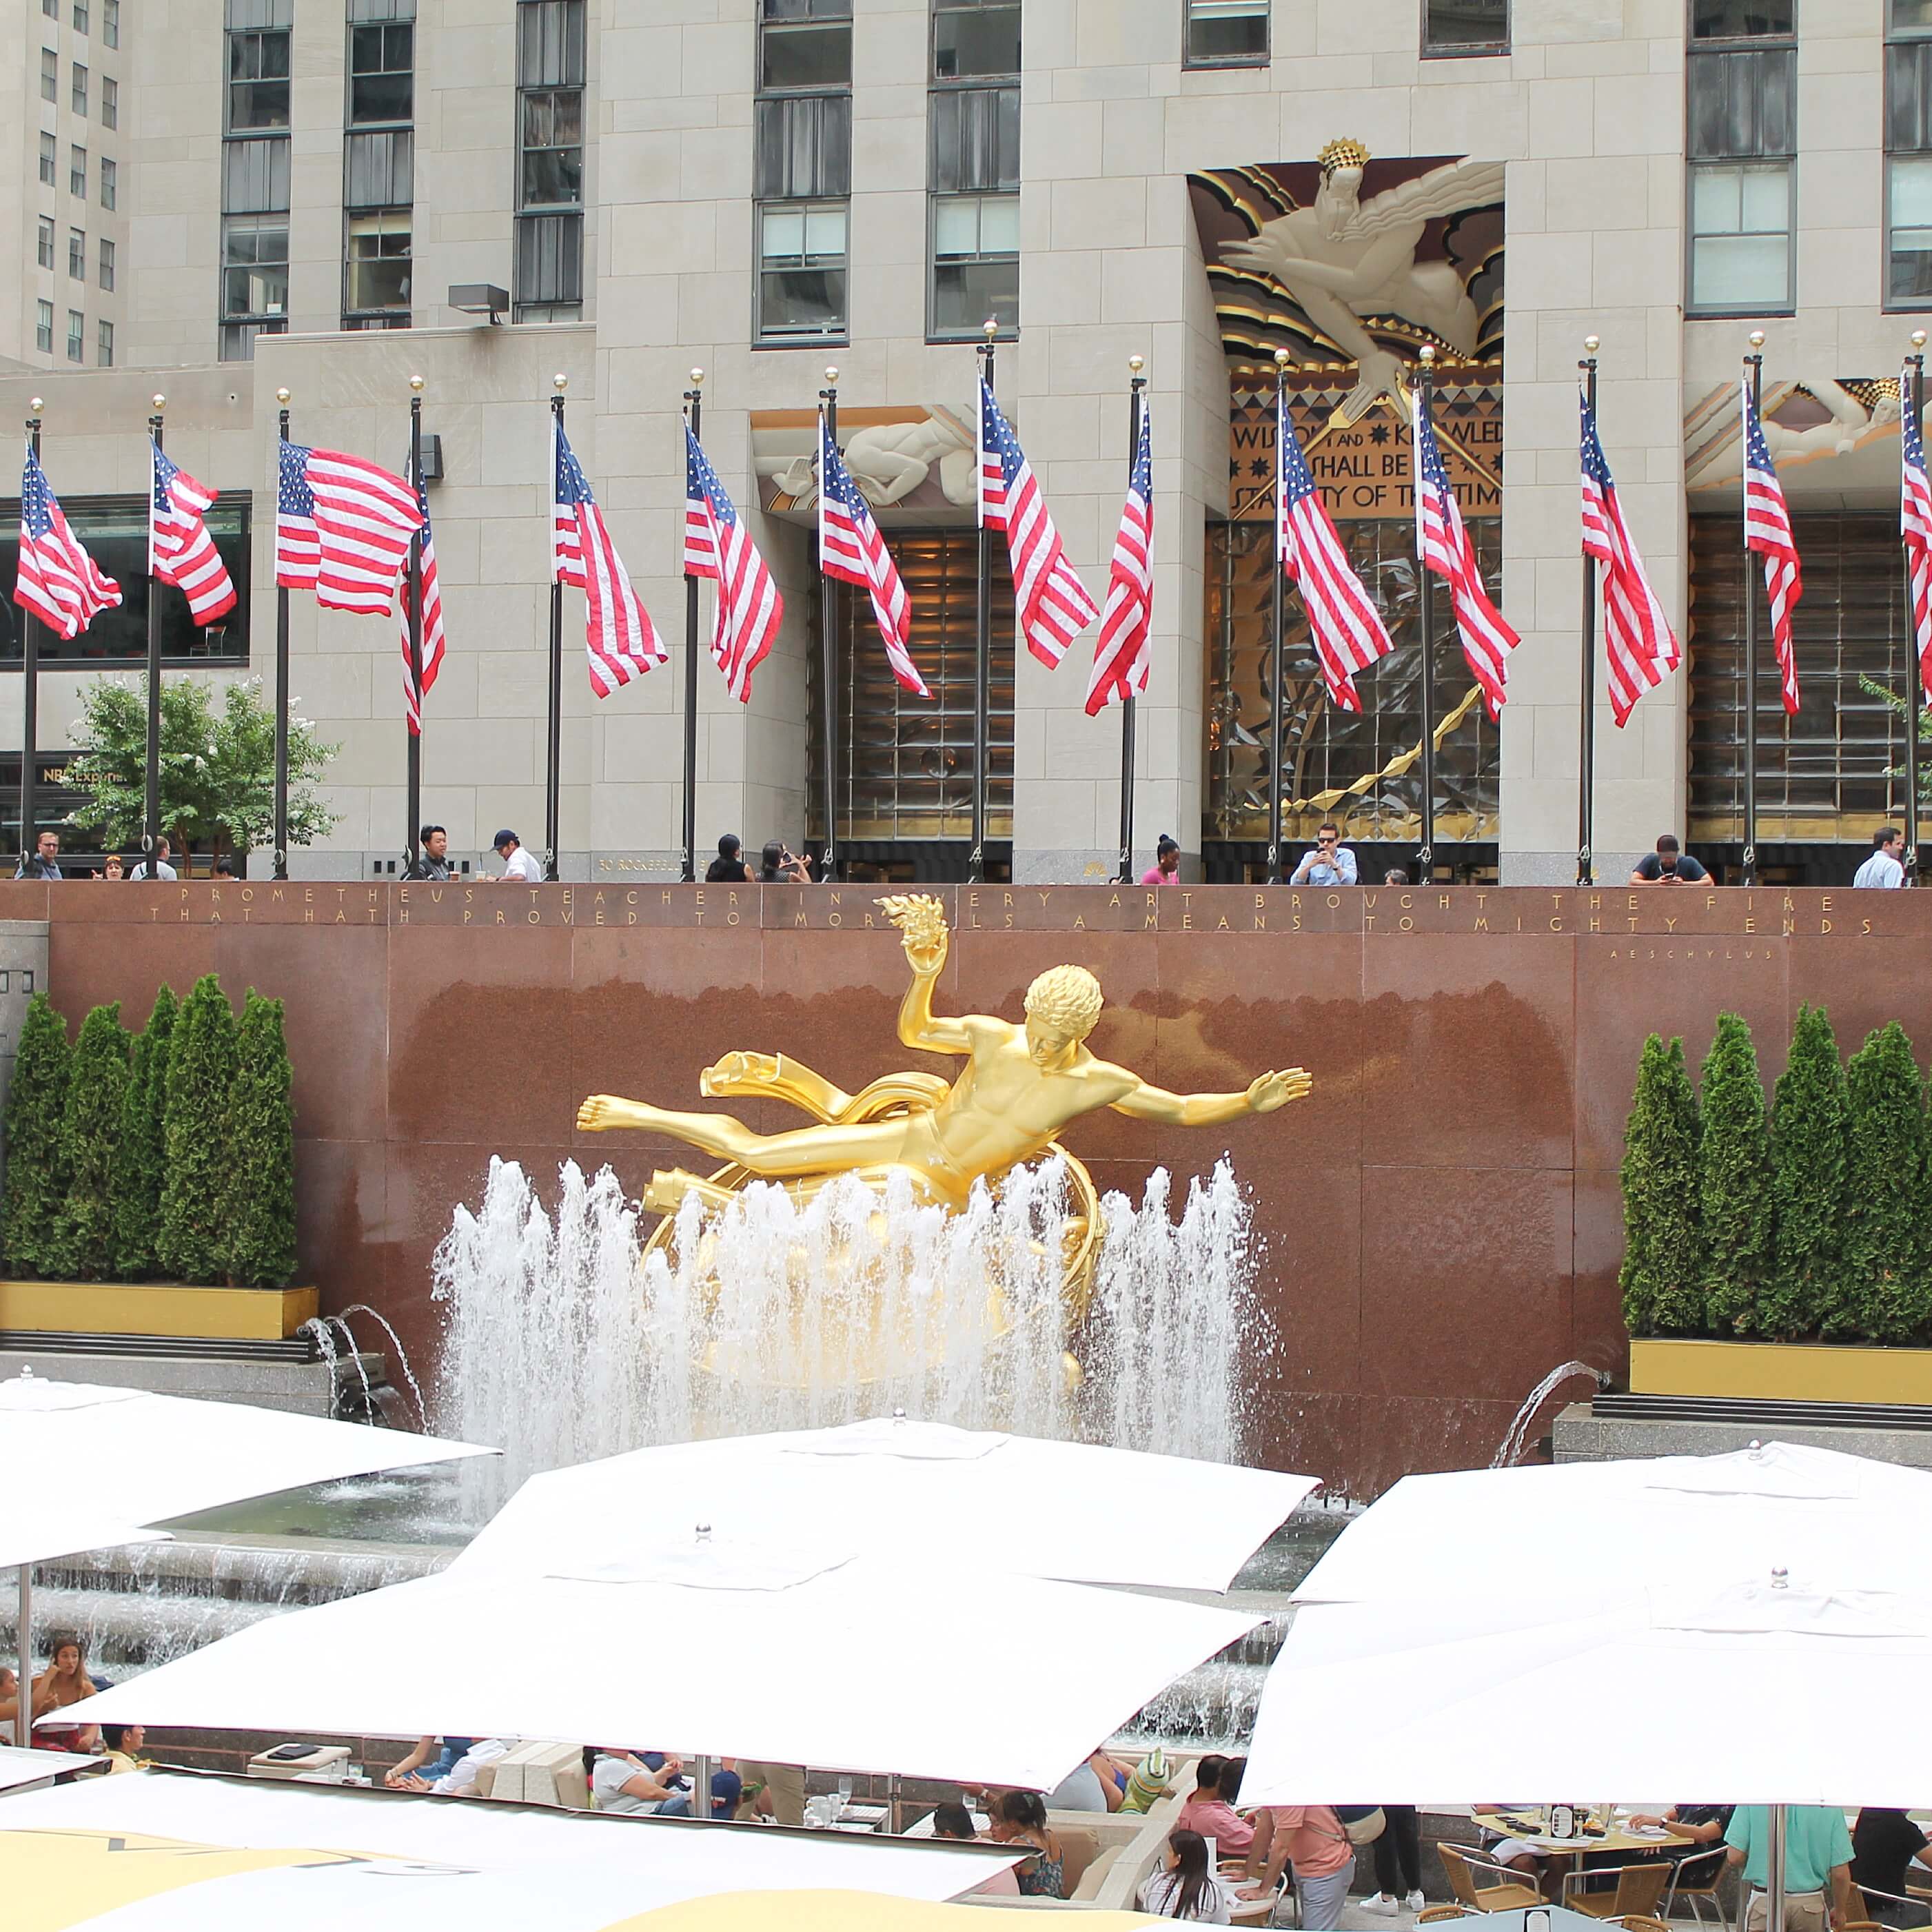 Kid-friendly activities in New York City | Kid-Friendly Activities in NYC. Fun things to do in NYC with your family. Site seeing Rockefeller Center.